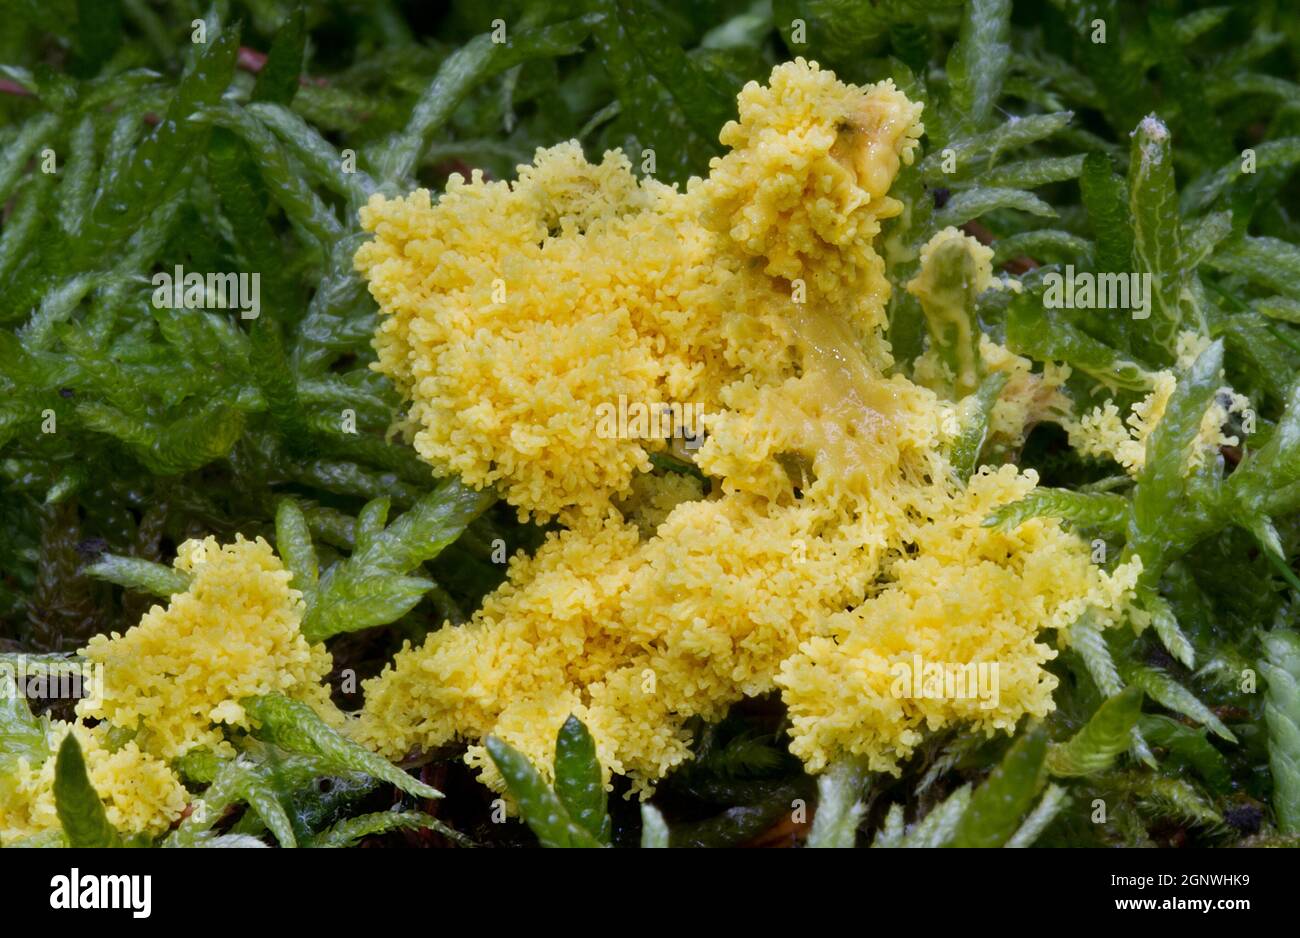 Scrambled egg slime, a slime mold, on Heather claw moss or Hypnum moss Stock Photo